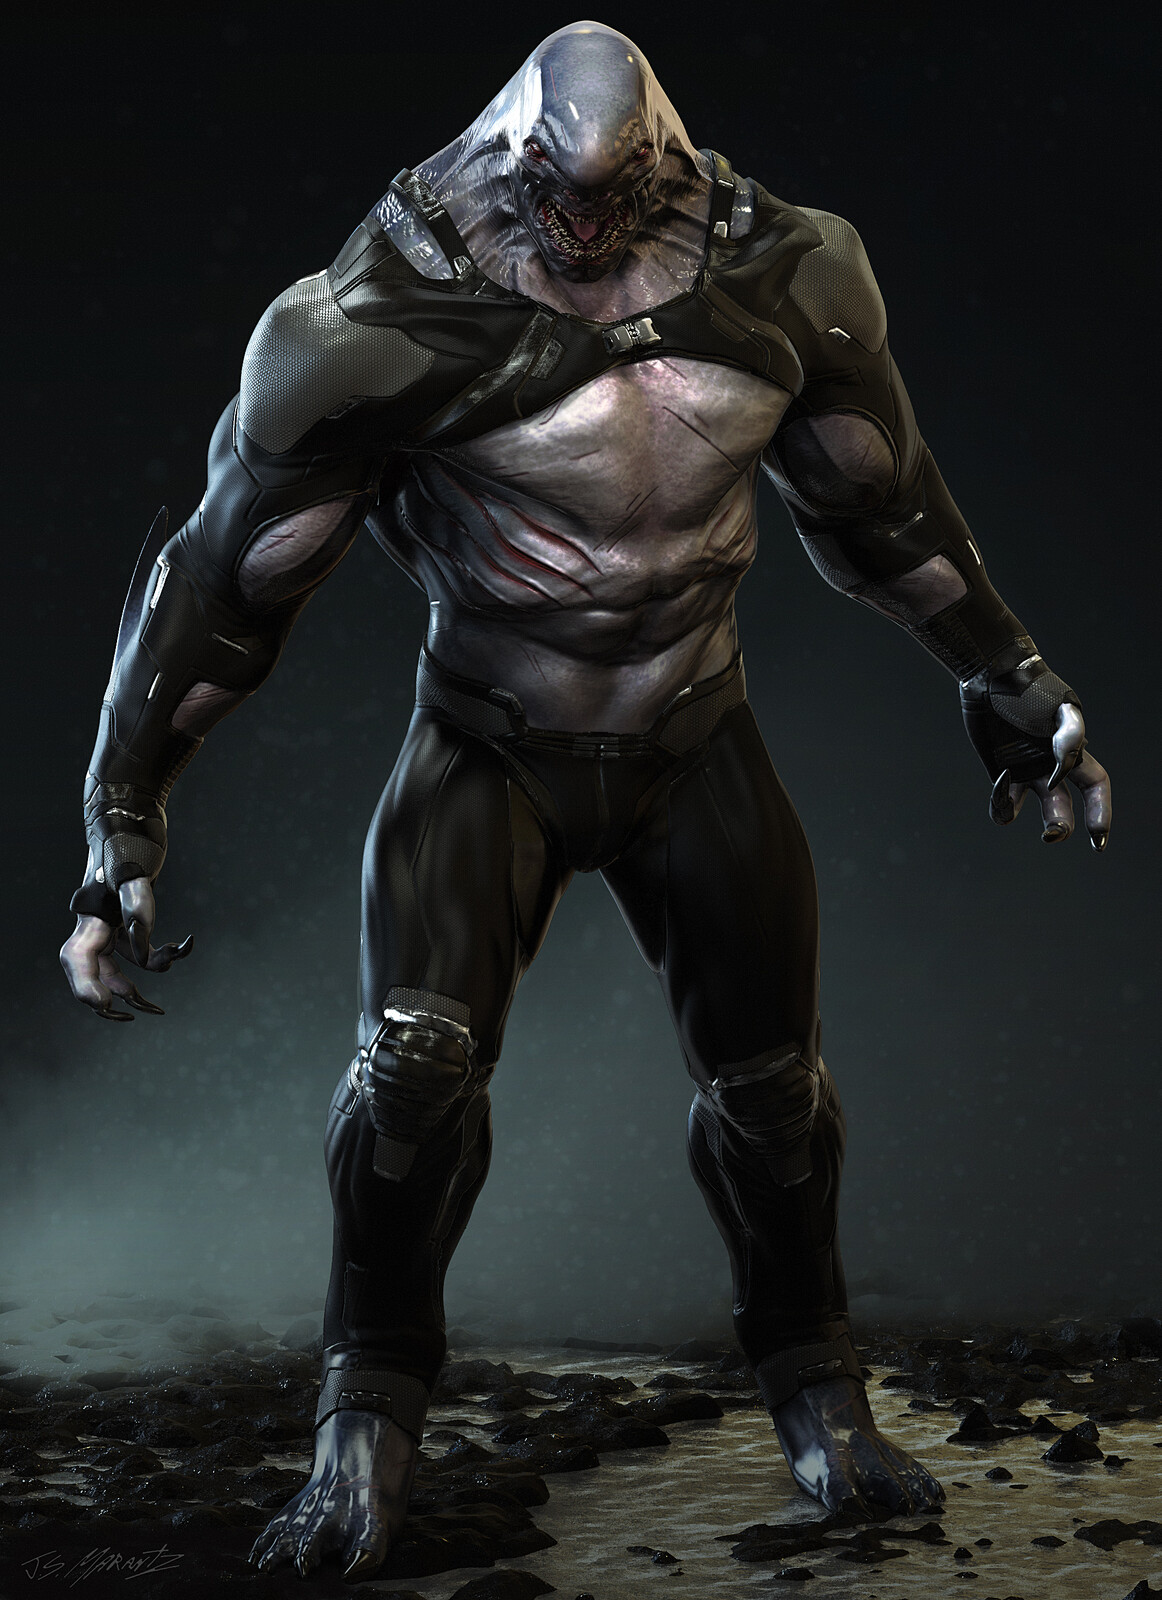 KING SHARK DESIGN for a cancelled game